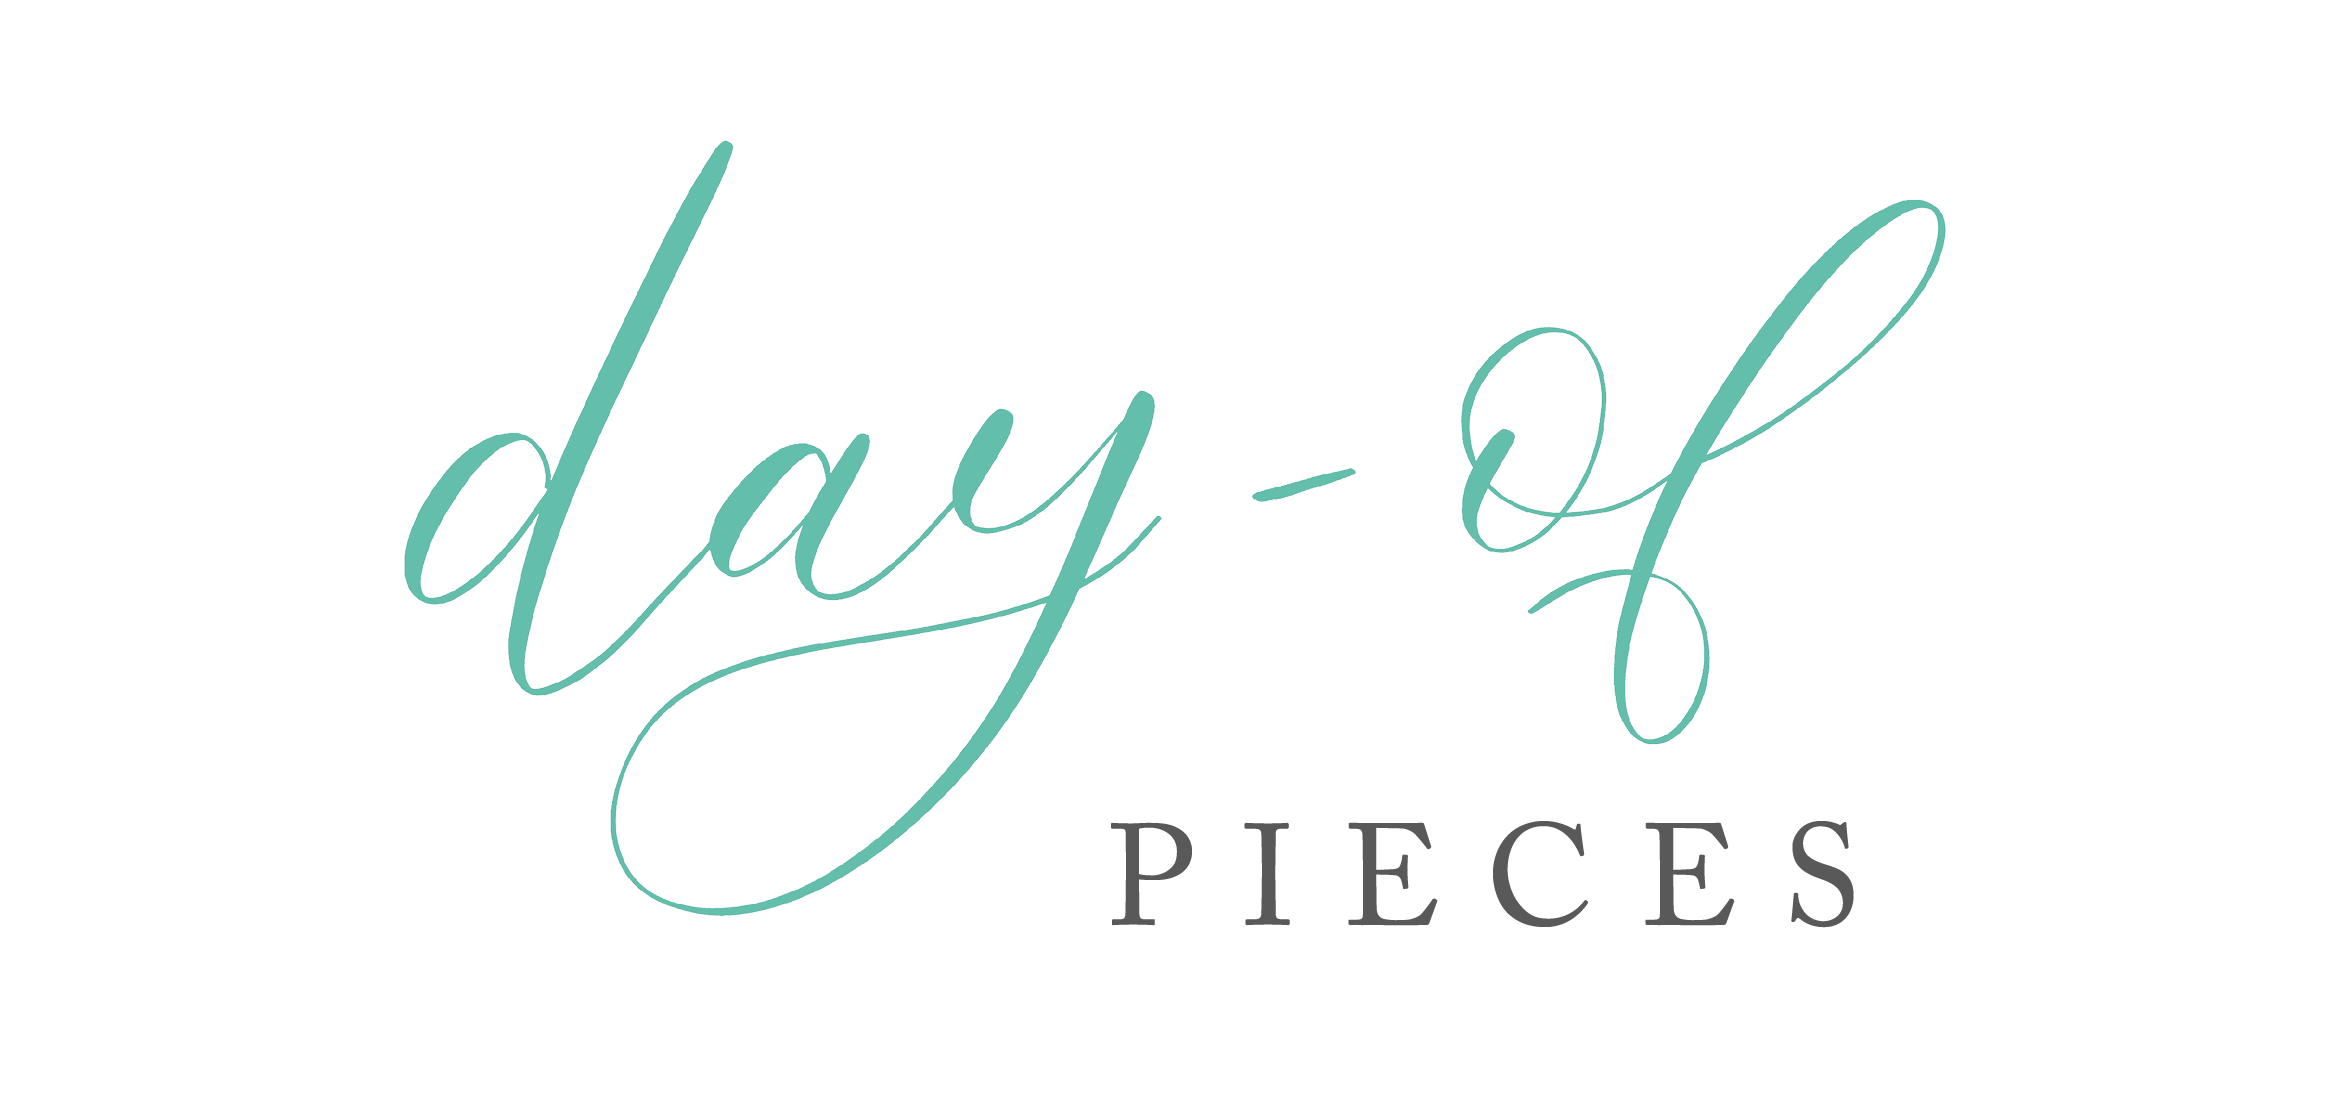 day-of pieces